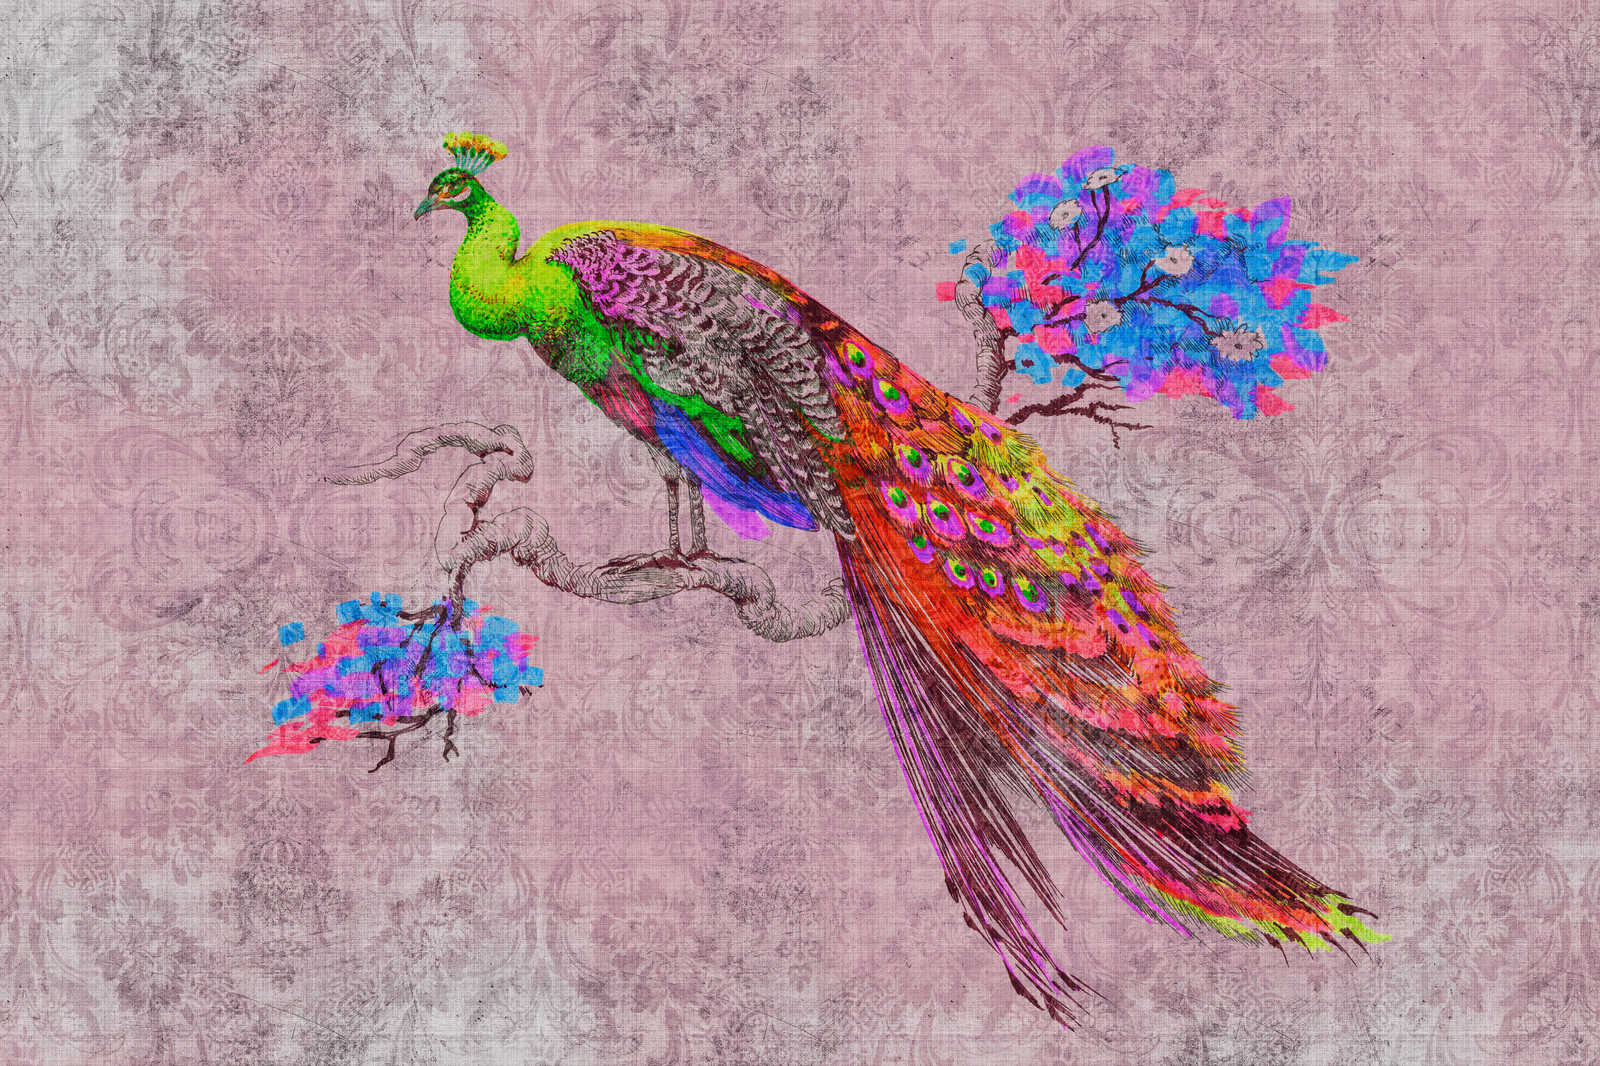             Peacock 2 - Canvas painting with peacock motif & ornament pattern in natural linen structure - 0.90 m x 0.60 m
        